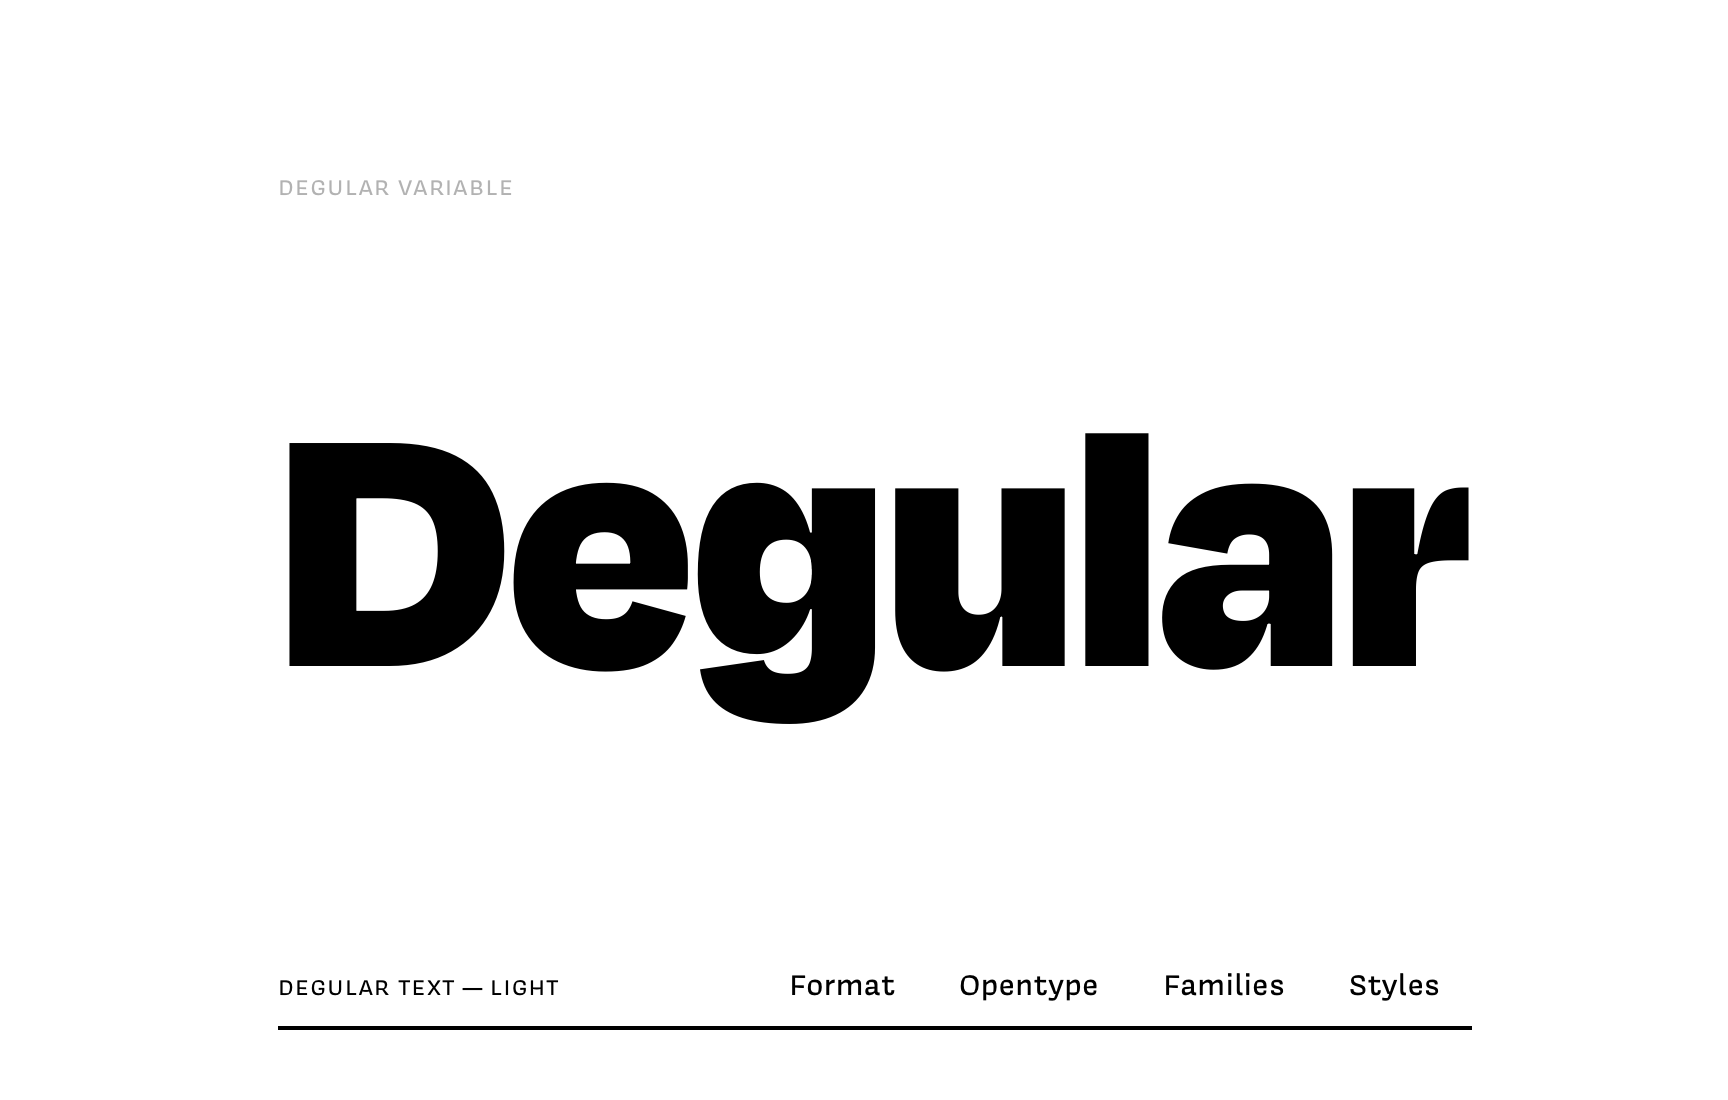 Degular a variable sans serif font from Oh No Type Co.